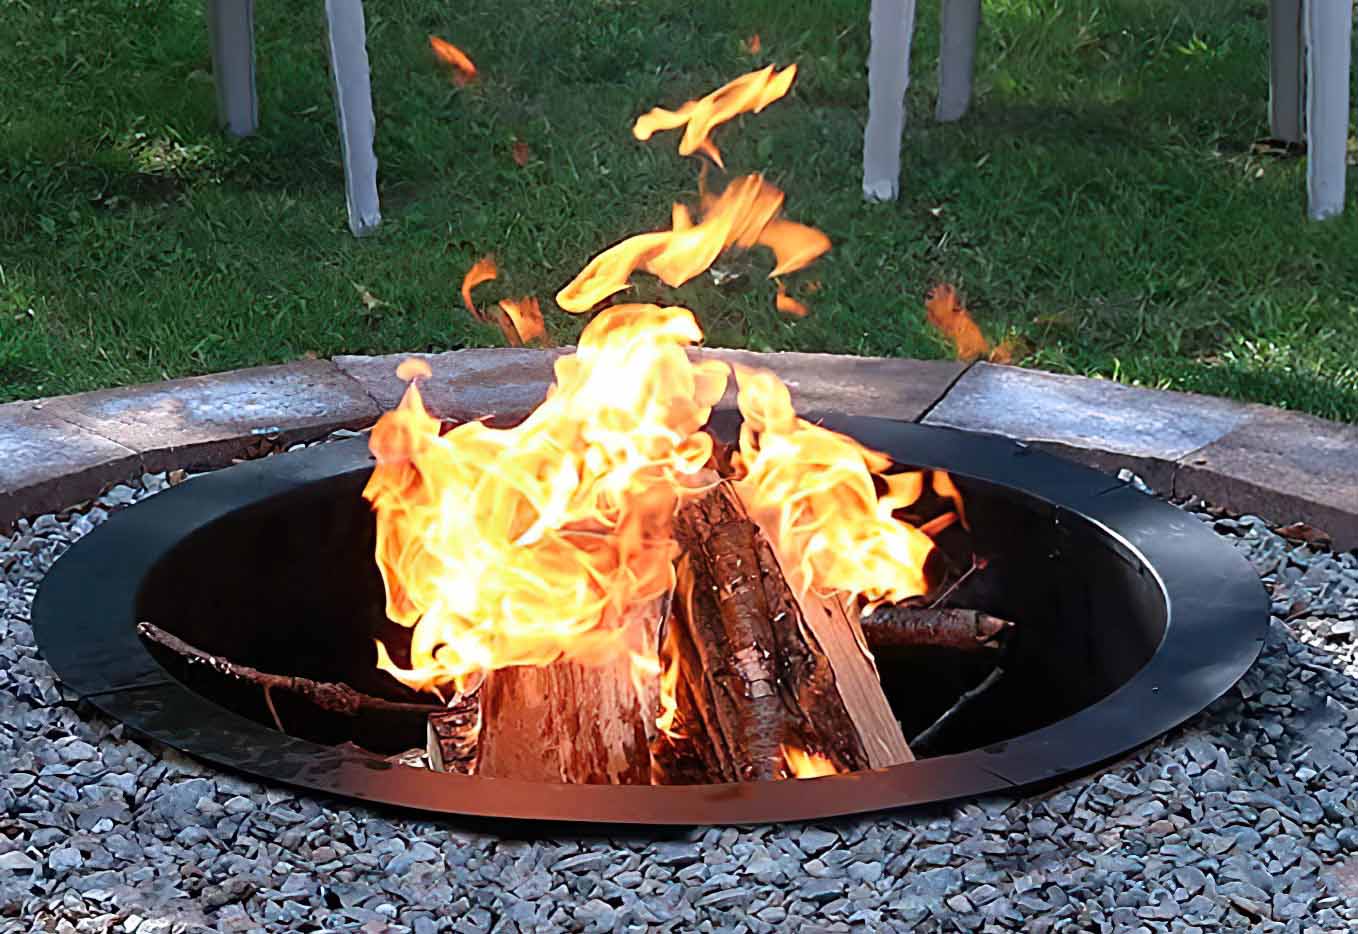 10 Best Fire Pit Ring in 2022